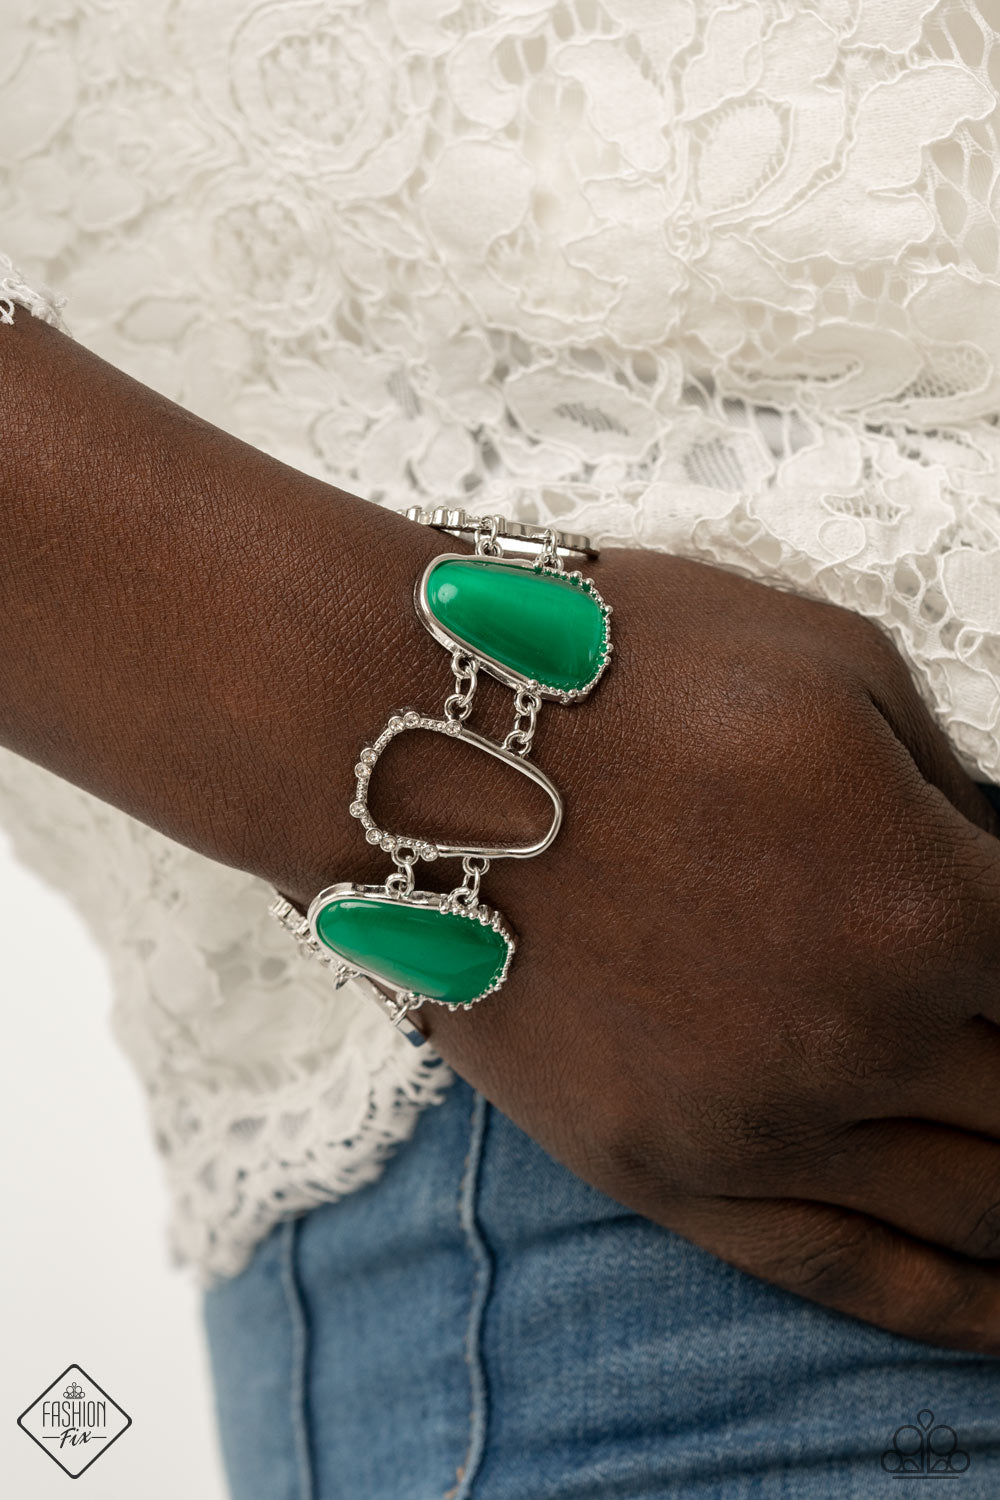 Yacht Club Couture Green Bracelet - Paparazzi Accessories